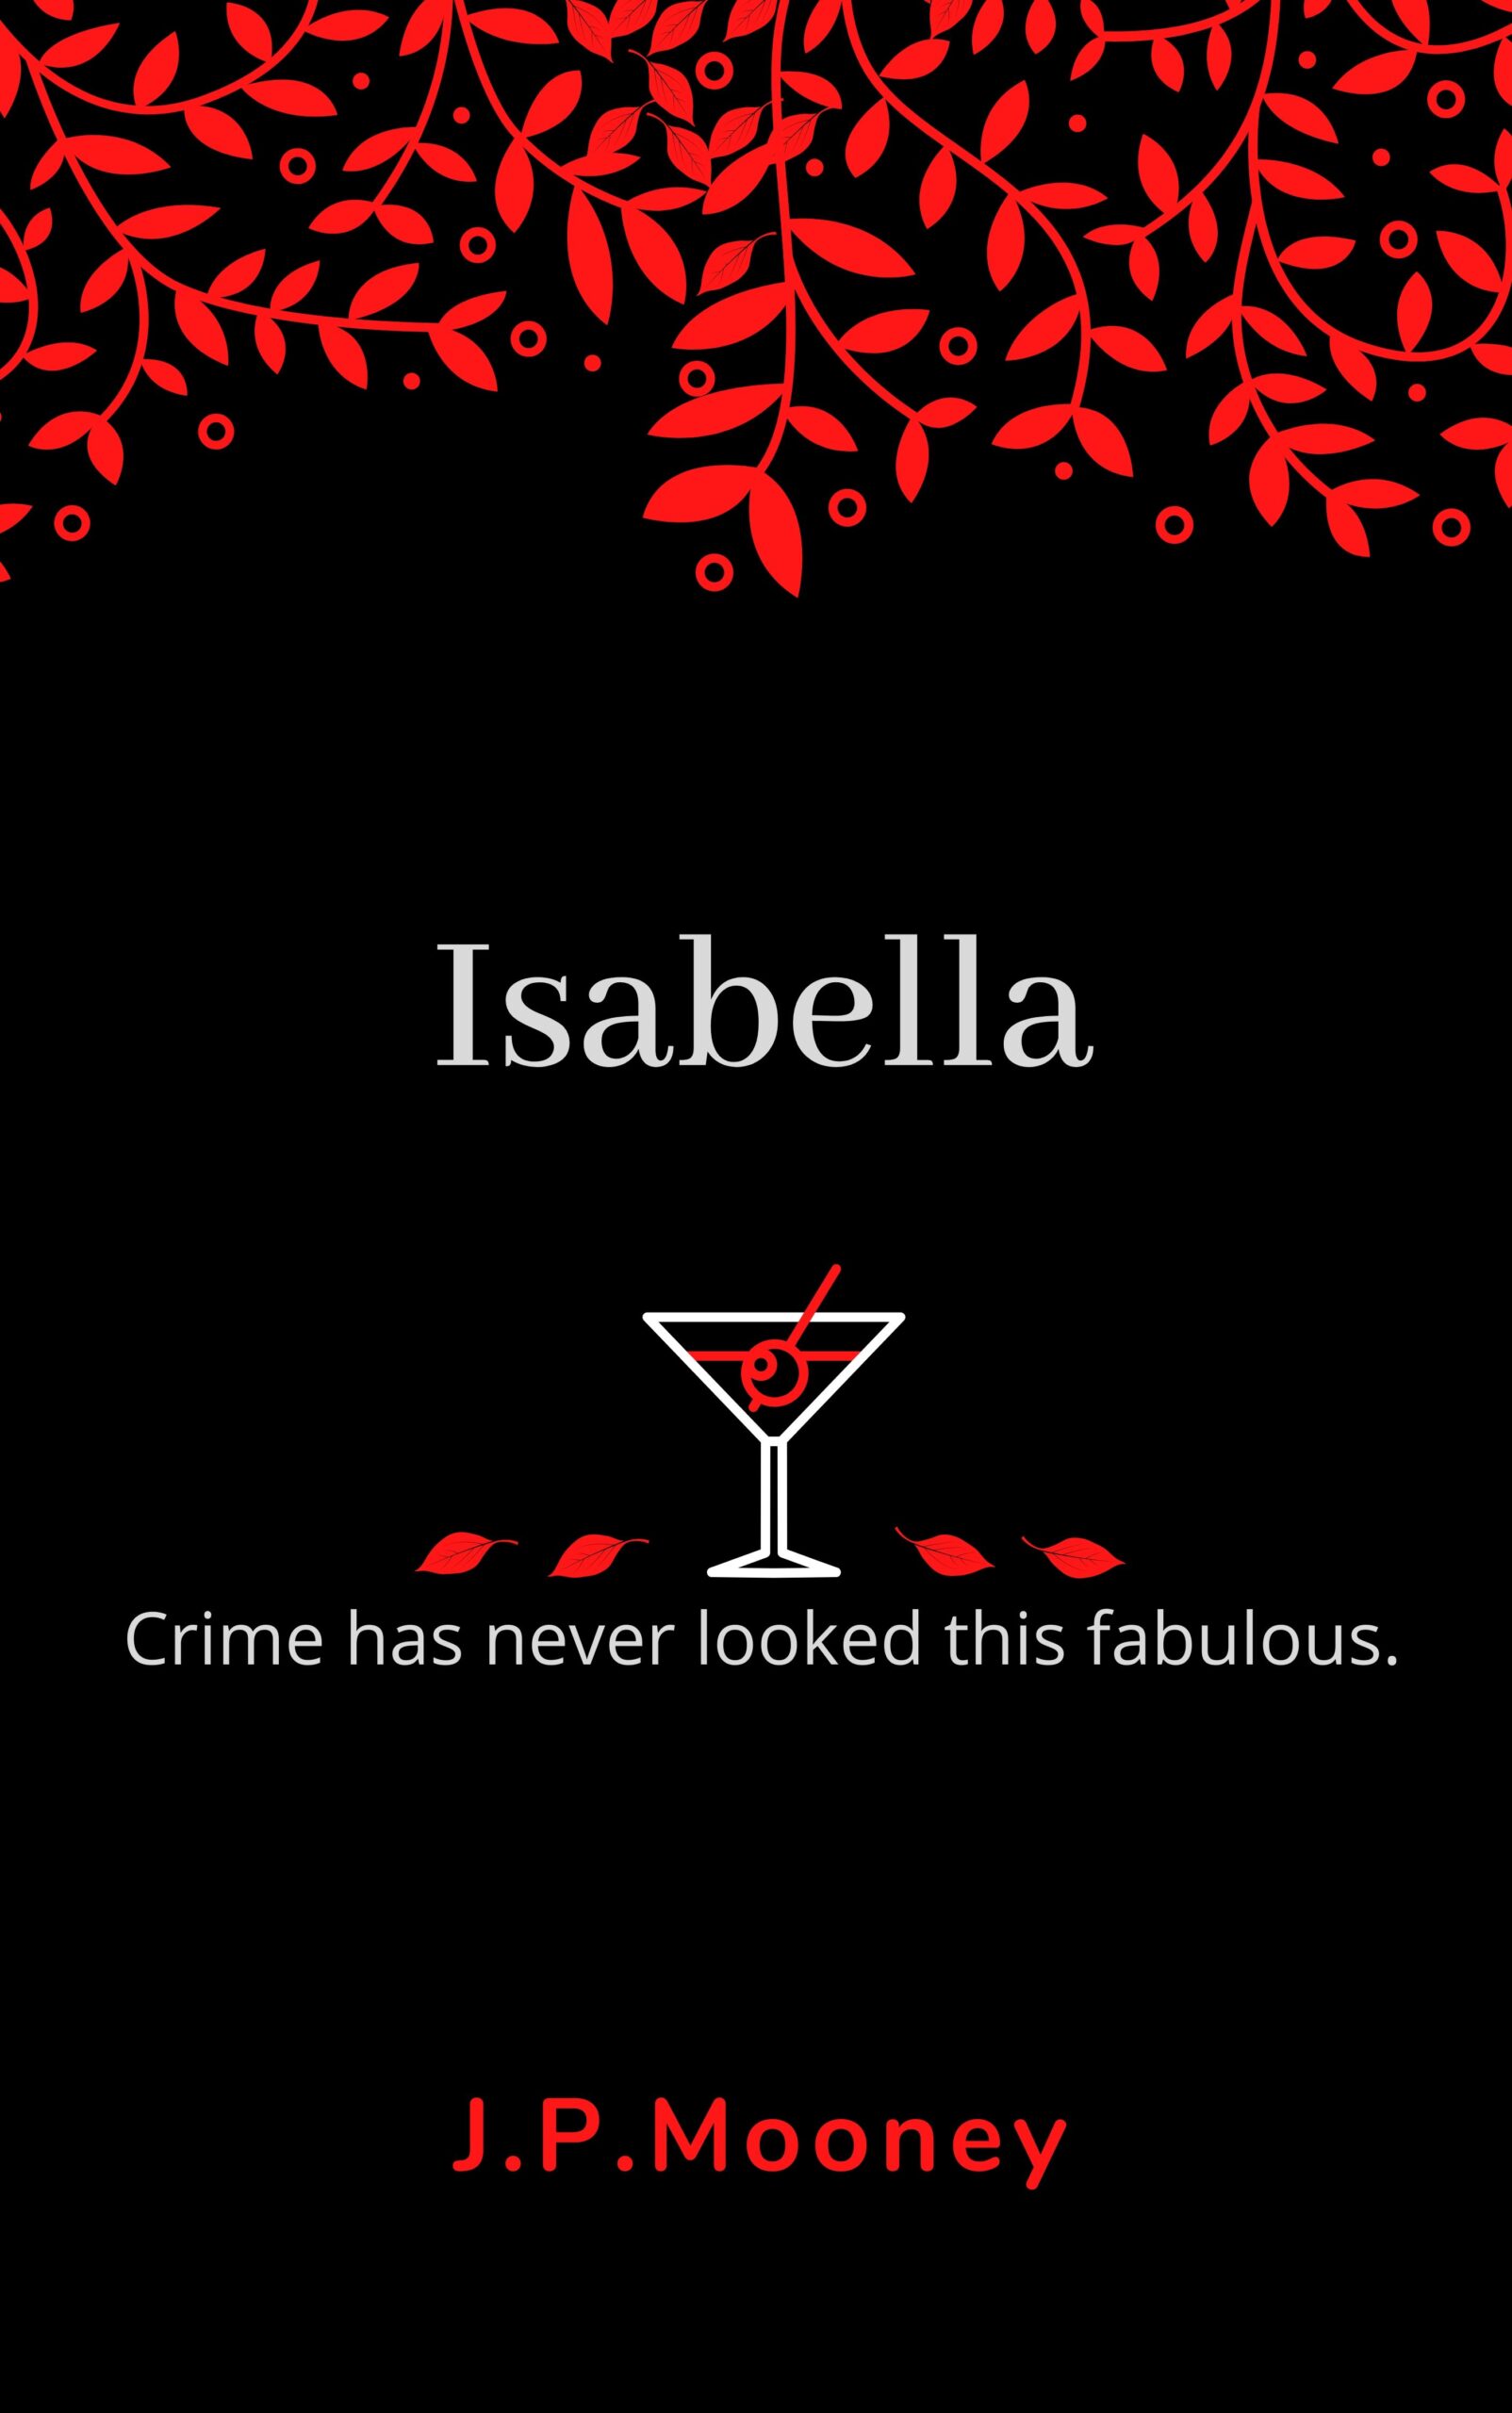 FREE: sabella : Crime has never looked this fabulous by J.P.Mooney